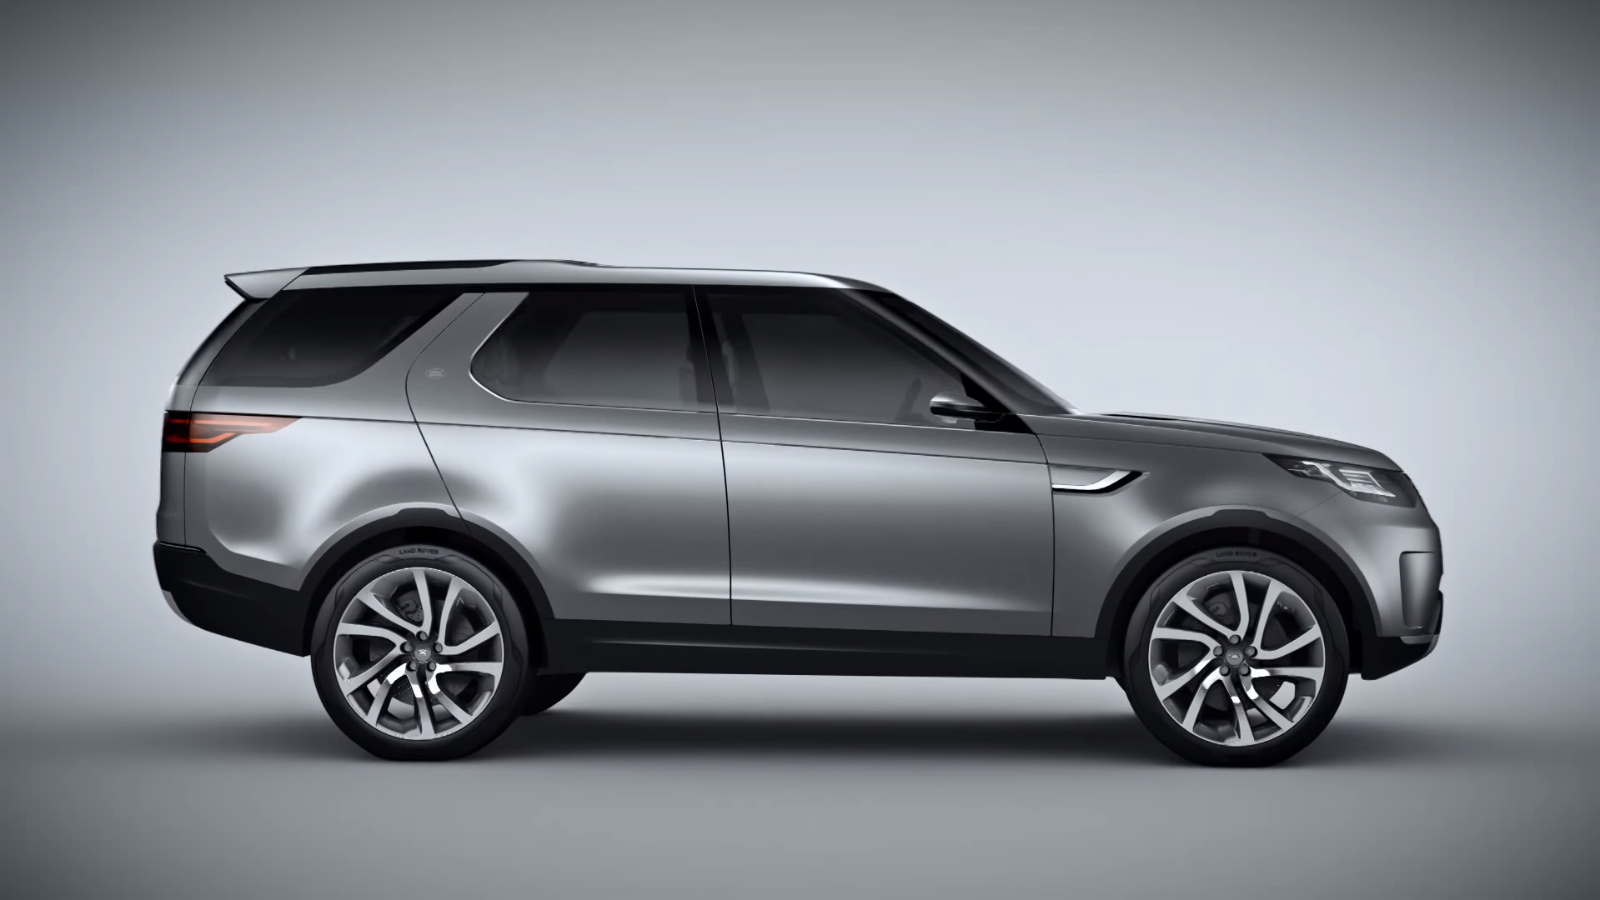 Land Rover New Discovery Vision side view